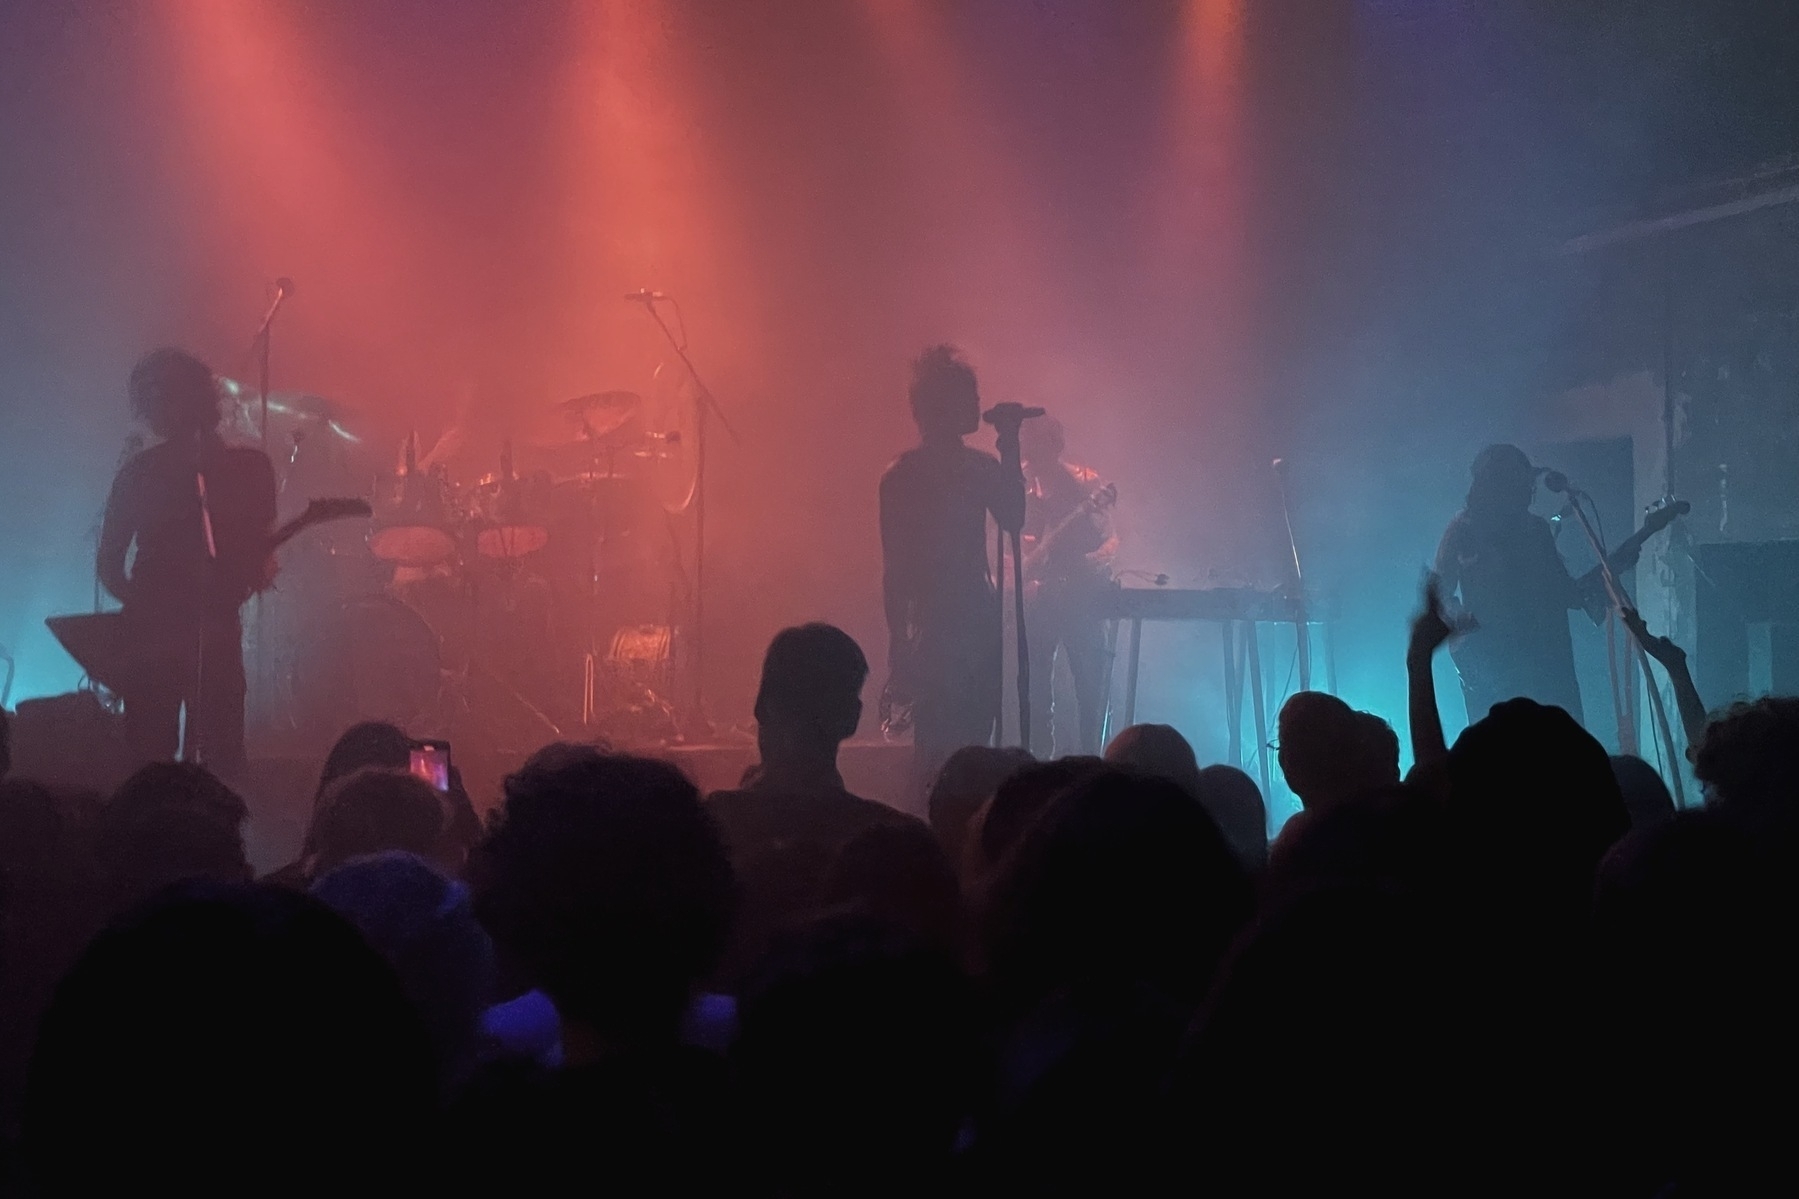 Band on stage in front of a crowd, very dark, the musicians are just shapes, the lighting is blue and red